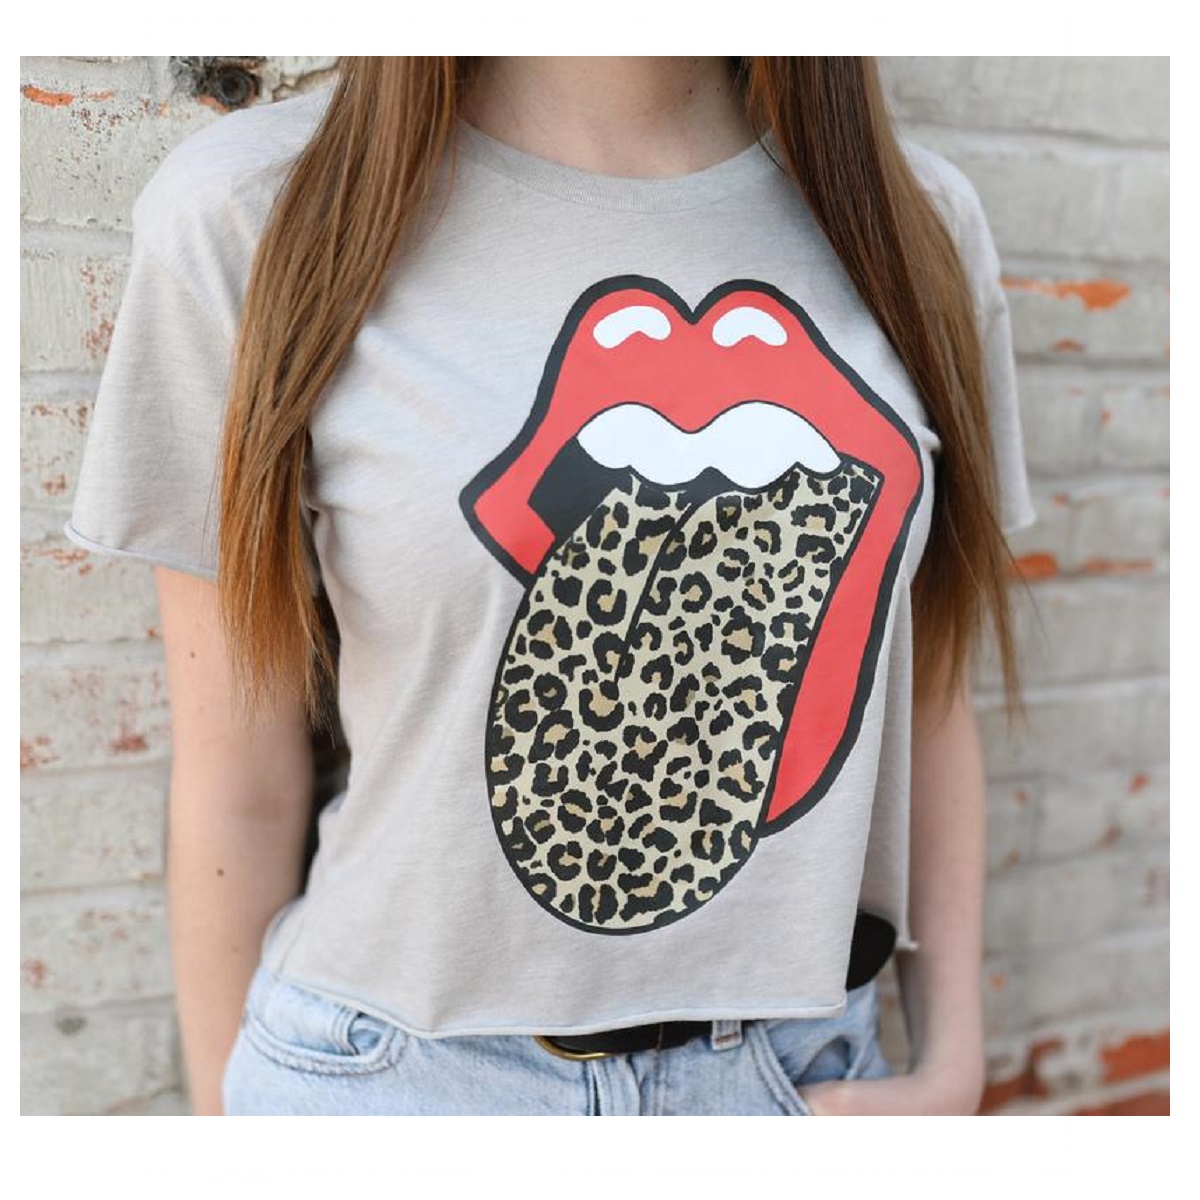 Rolling Stones T-Shirt - Women's Cheetah's Tongue Tee Gray Color, Charlie Watts the drummer